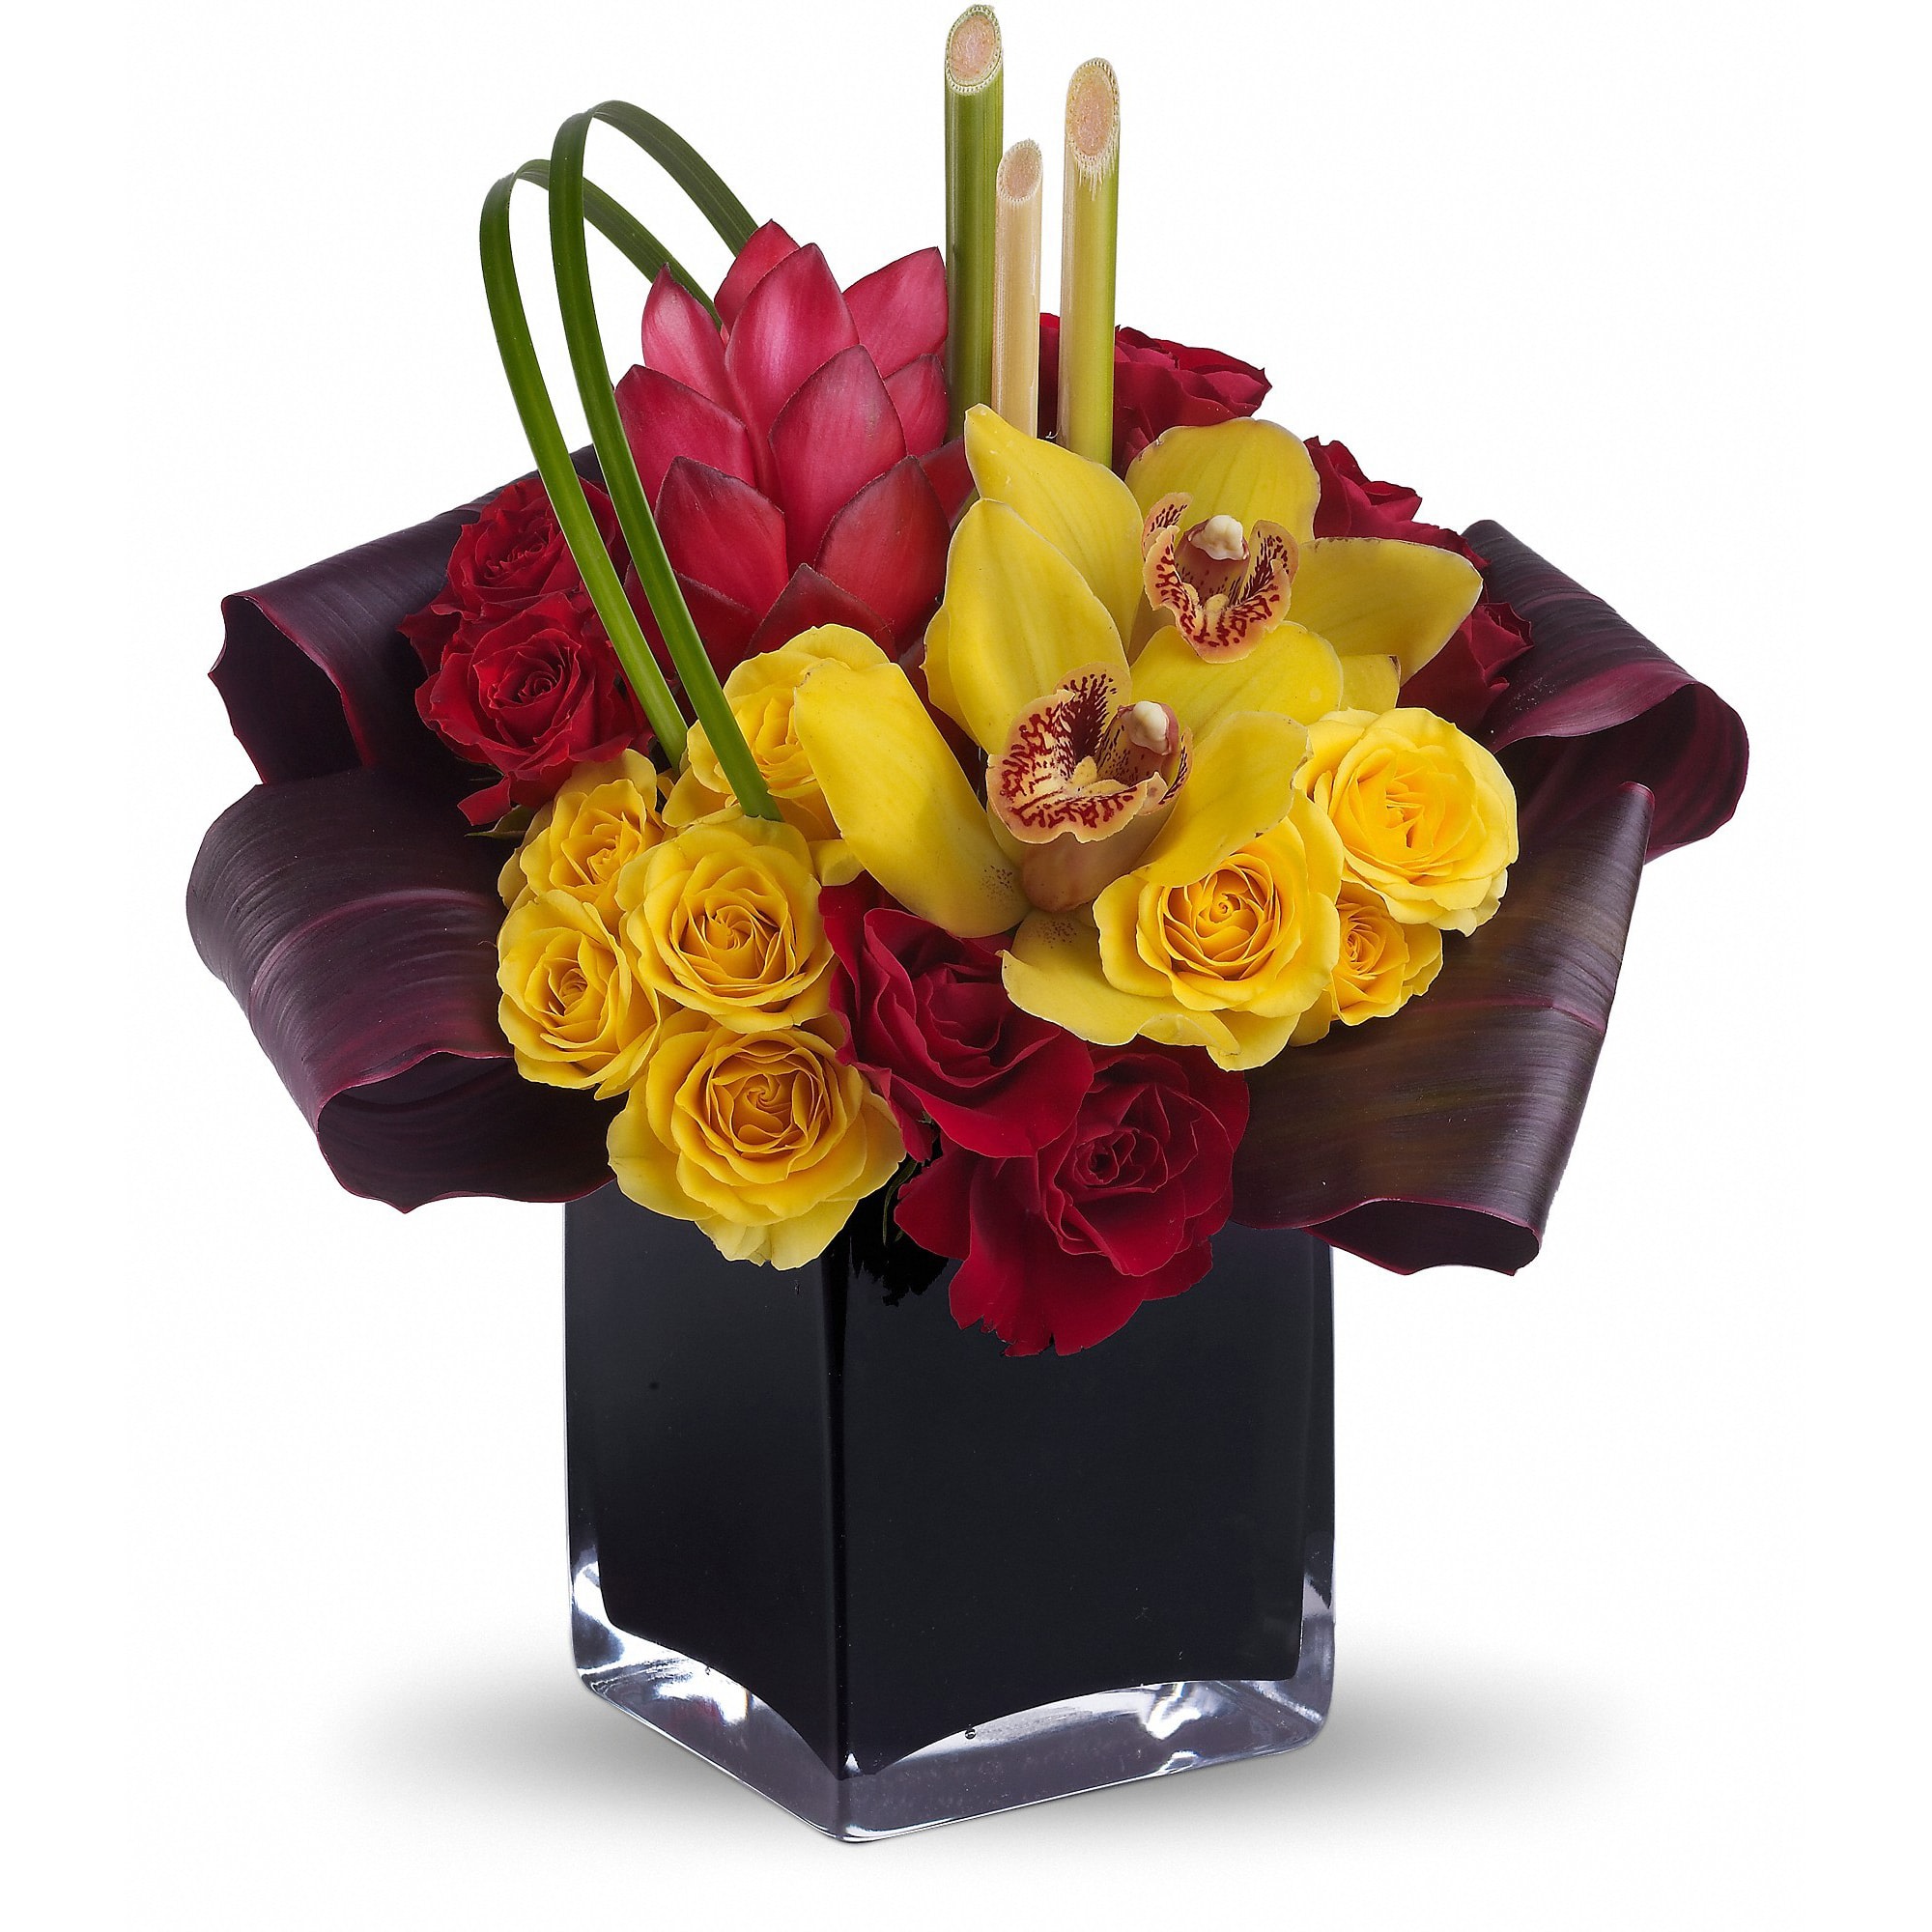 Teleflora's Island Dreams - Island dreams can come true no matter where you are if you're lucky enough to receive this delightful bouquet. It beautifully combines tropical flowers with greens and hand-delivers them in a dramatic black cube vase.    Yellow cymbidium orchids, red ginger, red and yellow spray roses, leaves and grass are perfectly tucked into a modern cube vase. Send a dream come true!    Approximately 10 1/2&quot; W x 12&quot; H    Orientation: All-Around    As Shown : T85-2A  Deluxe : T85-2B  Premium : T85-2C